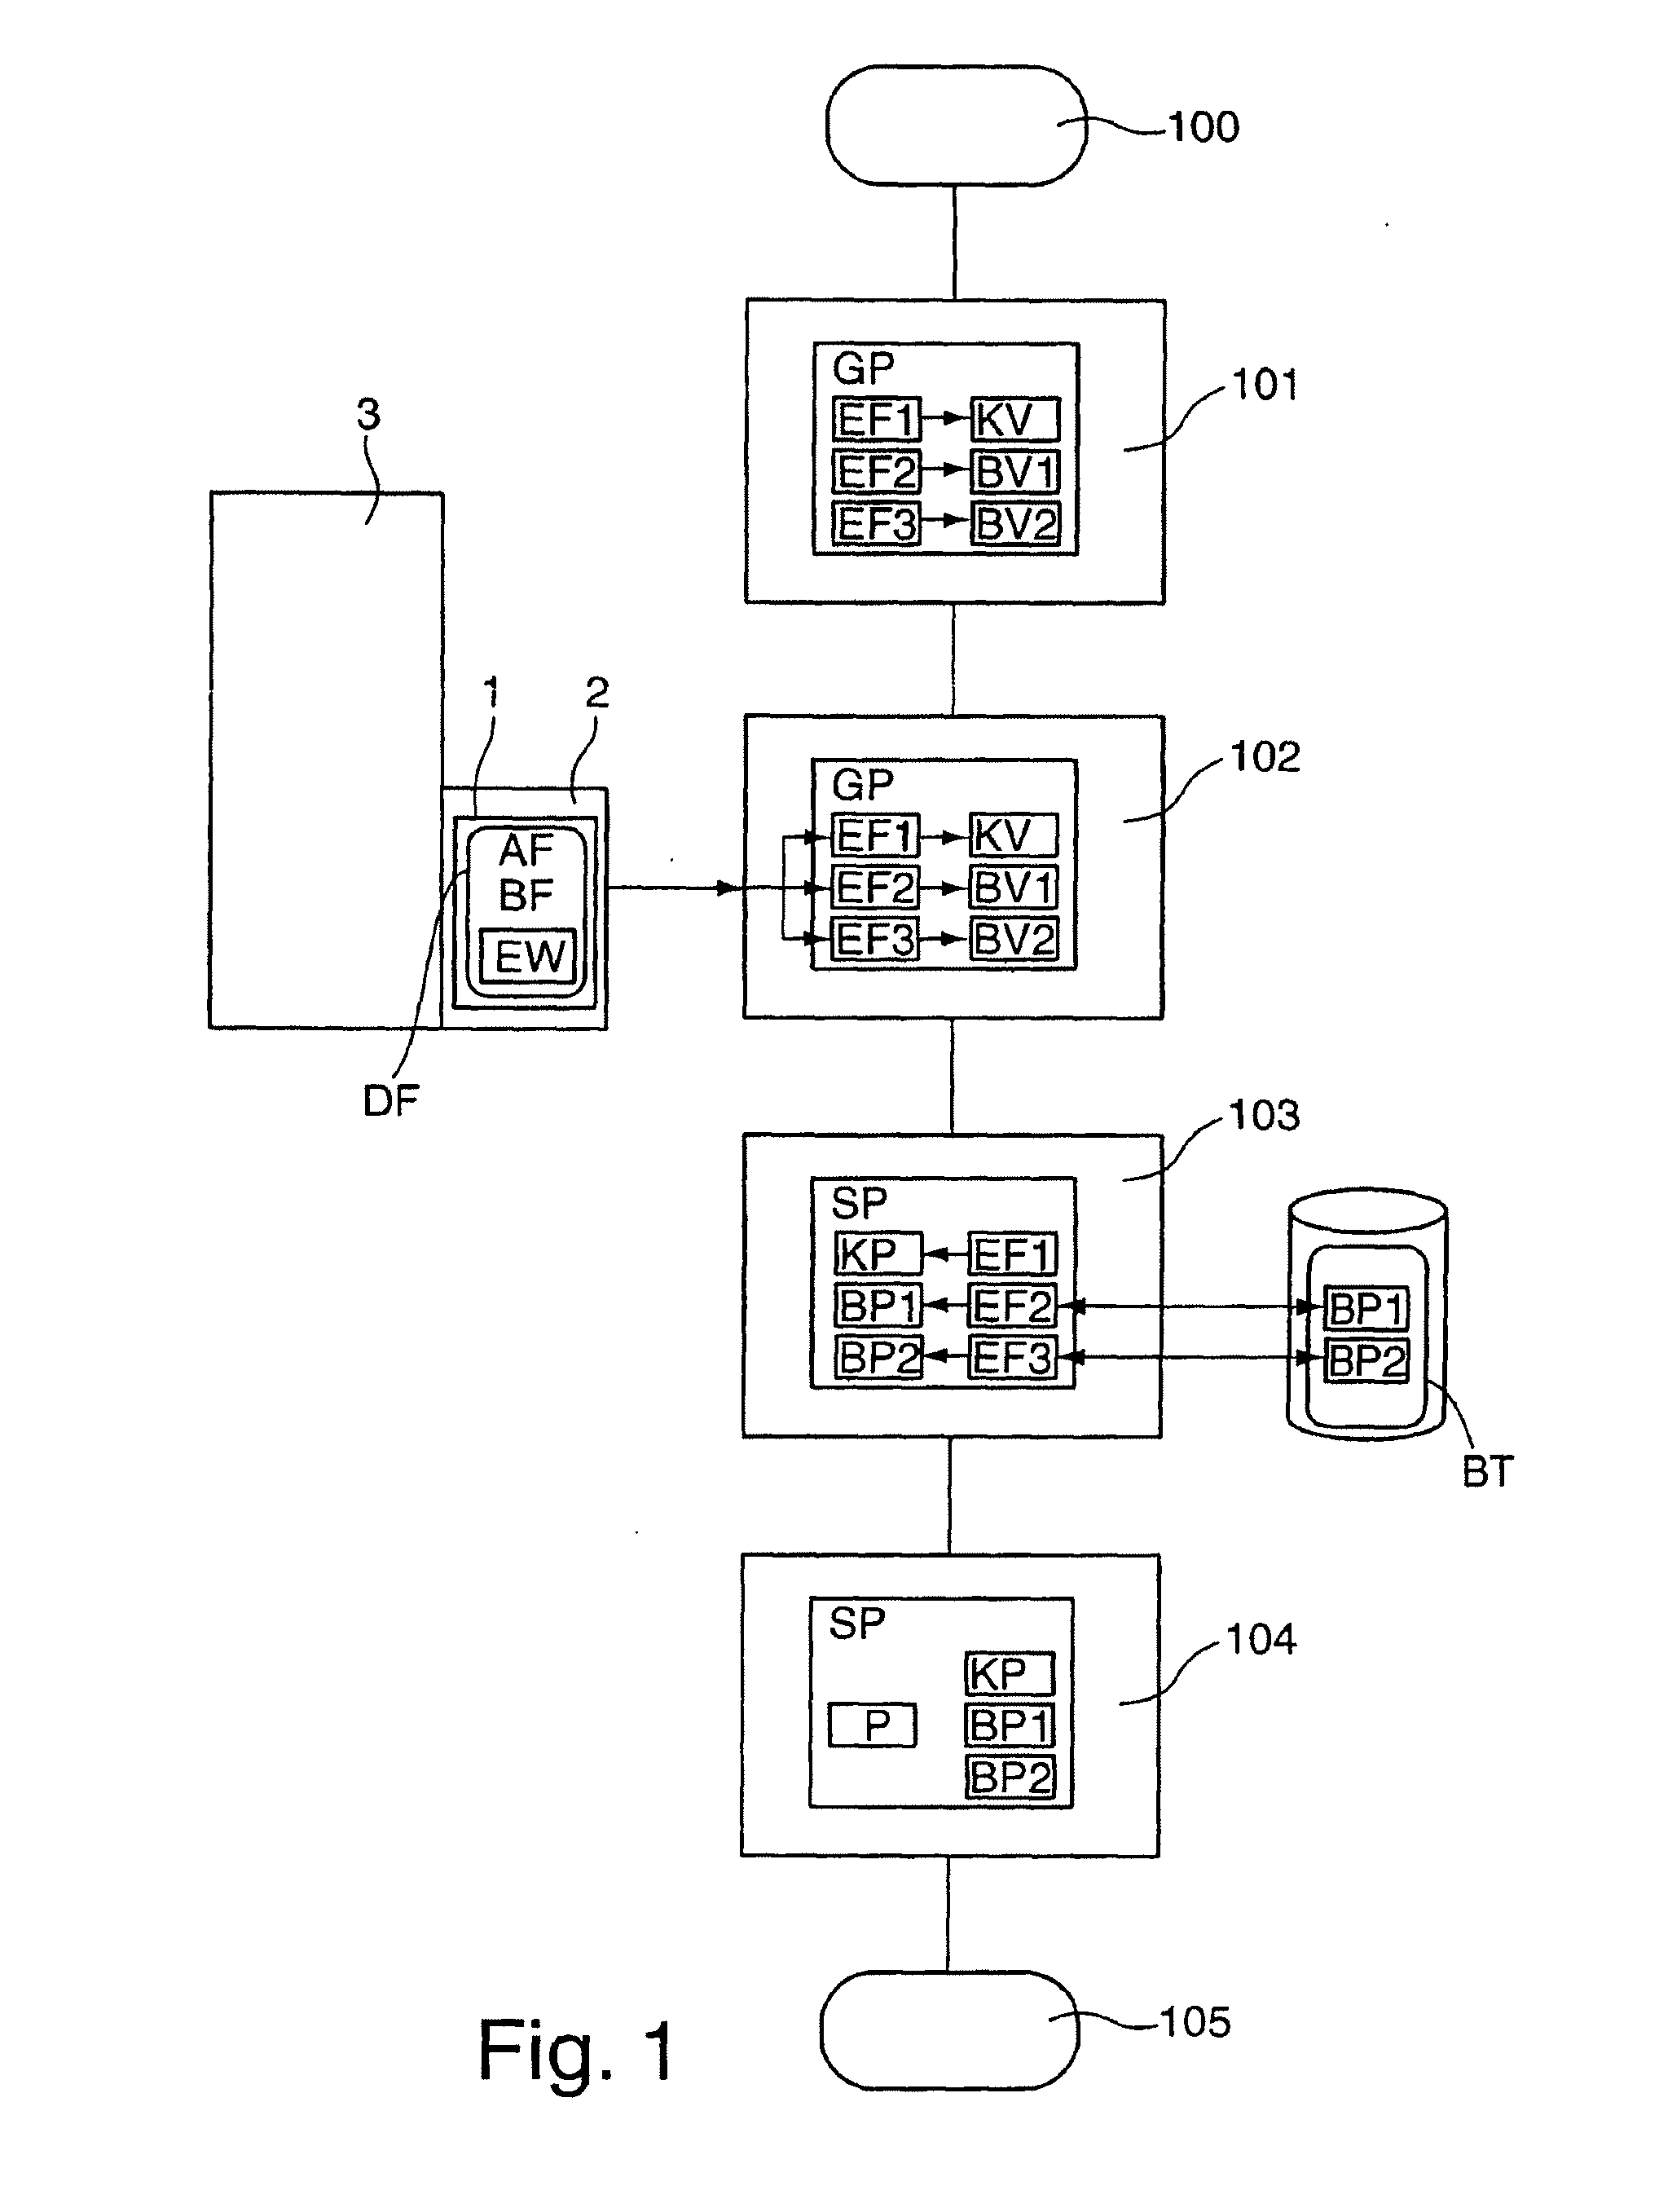 Method for creating numerical control programs